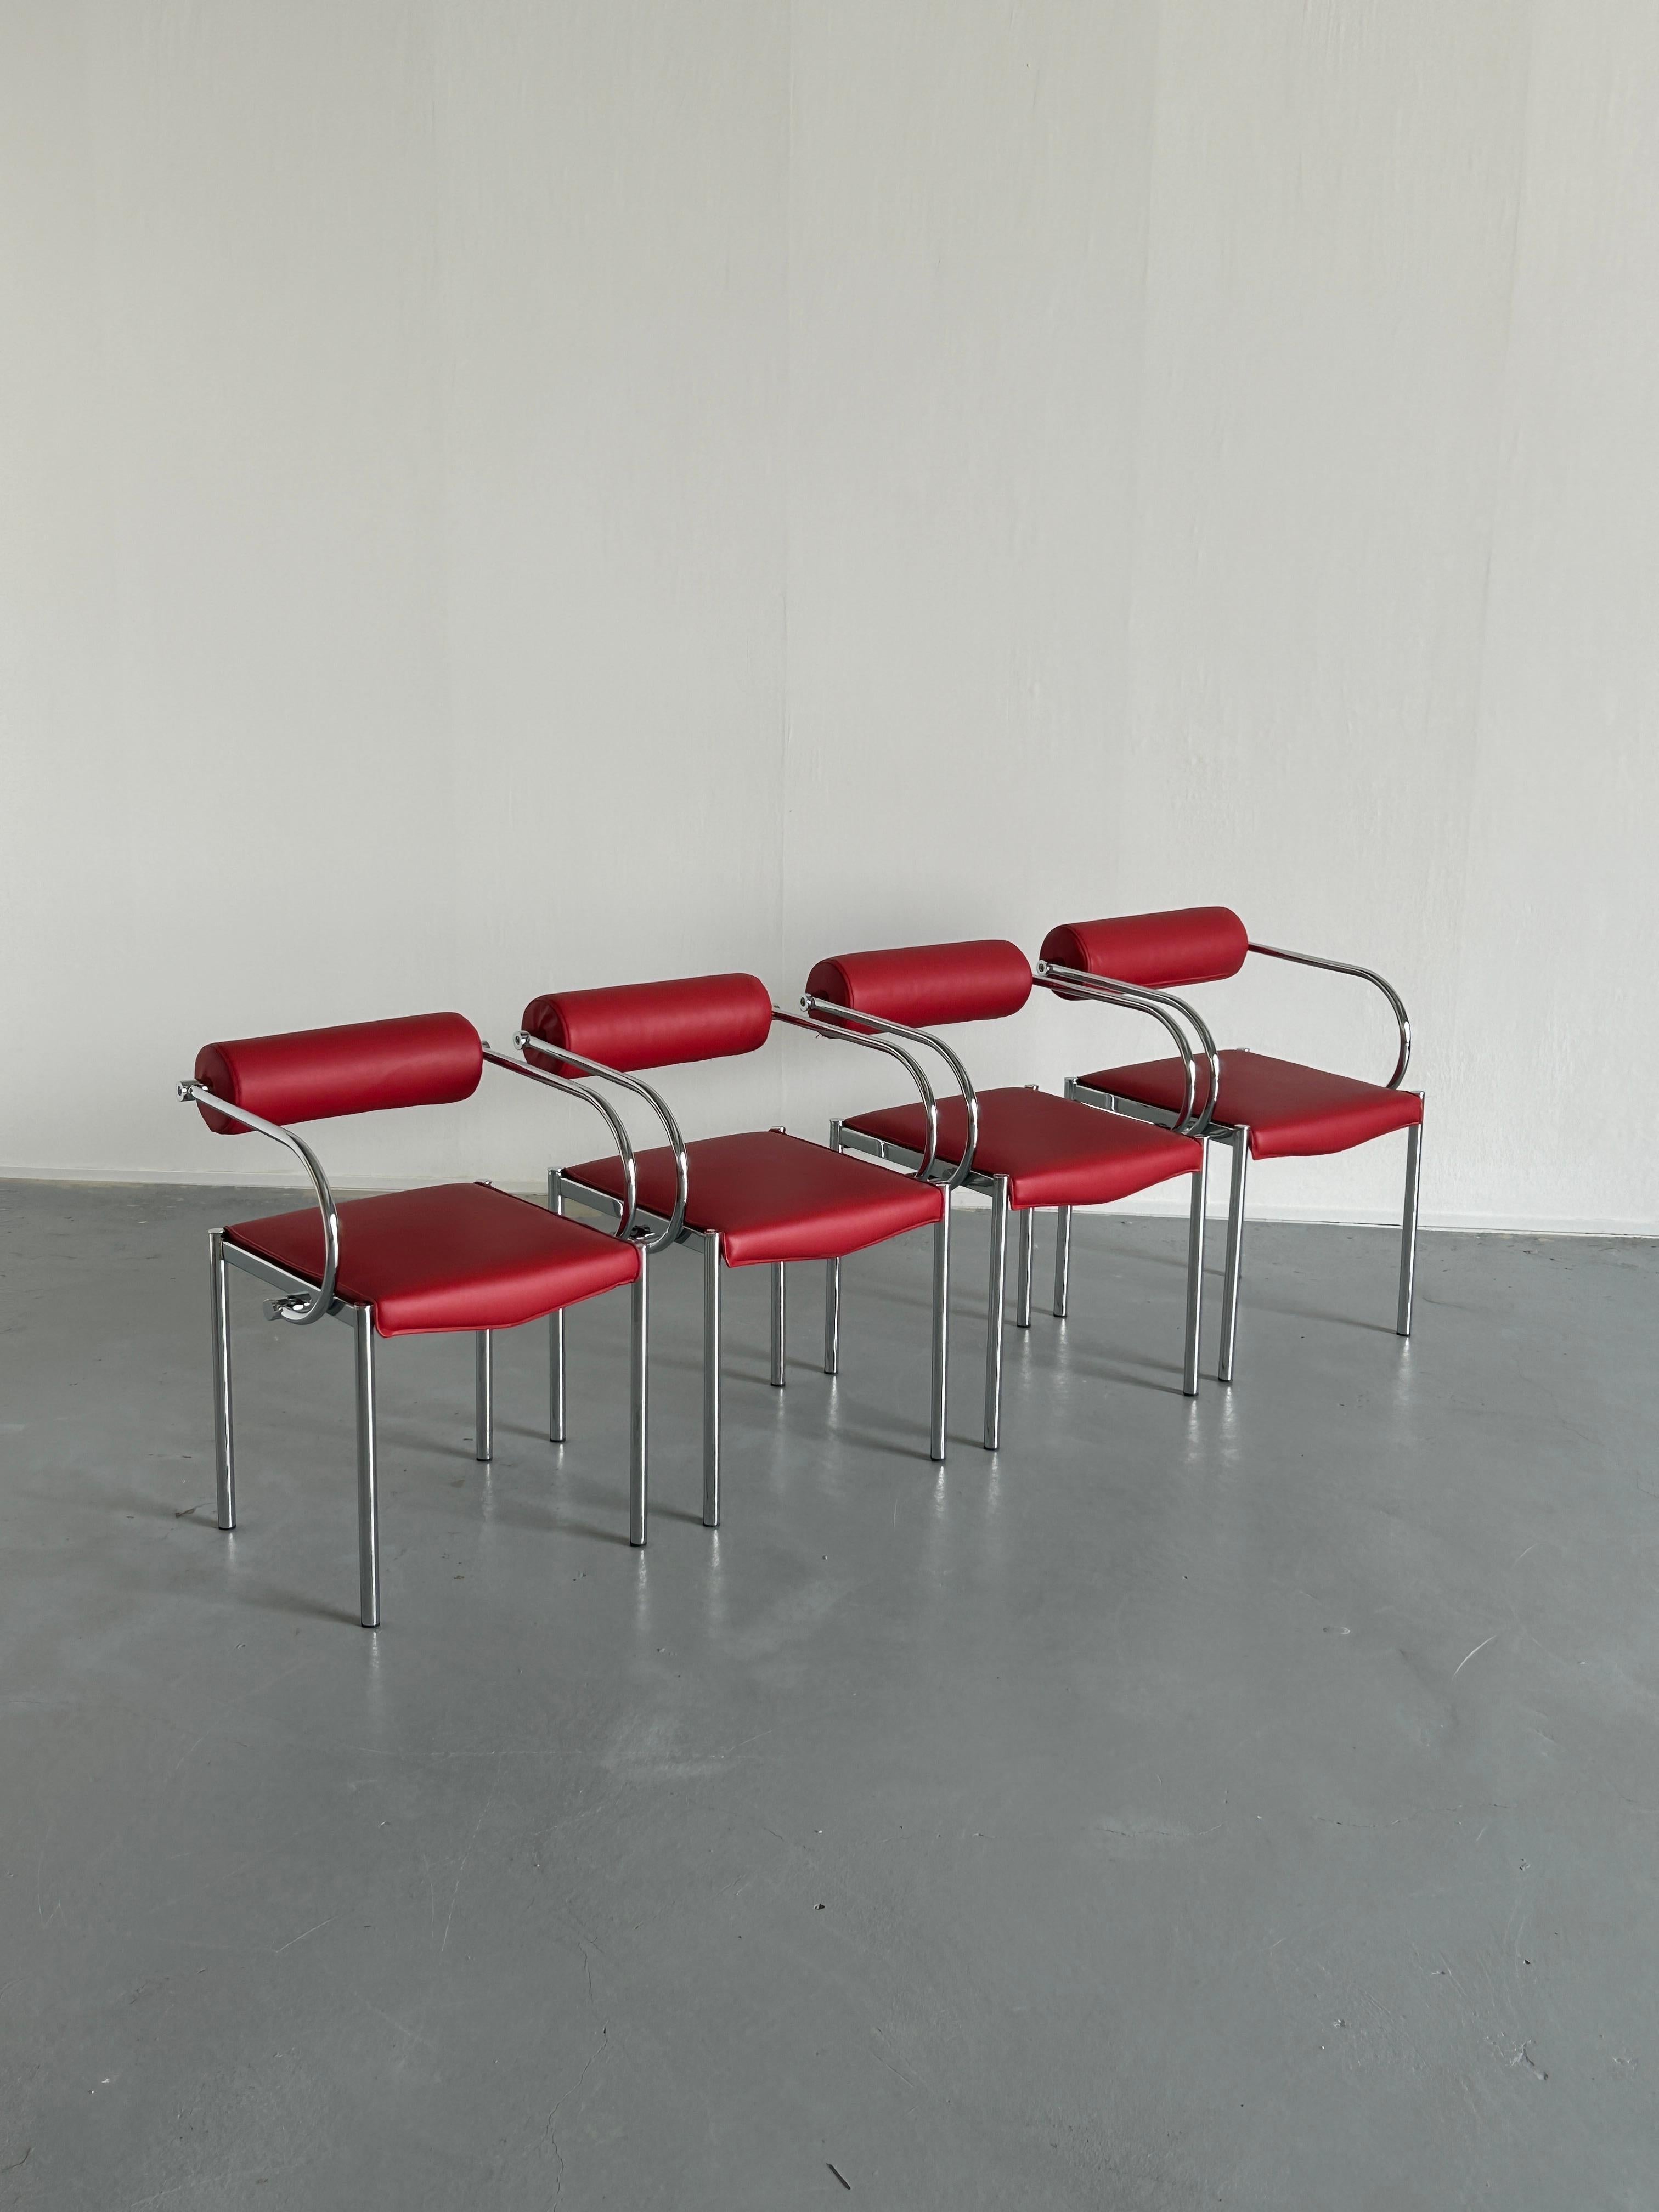 Italian Vintage Postmodern Tubular Chairs in the style of Arcadia Chairs by Paolo Piva